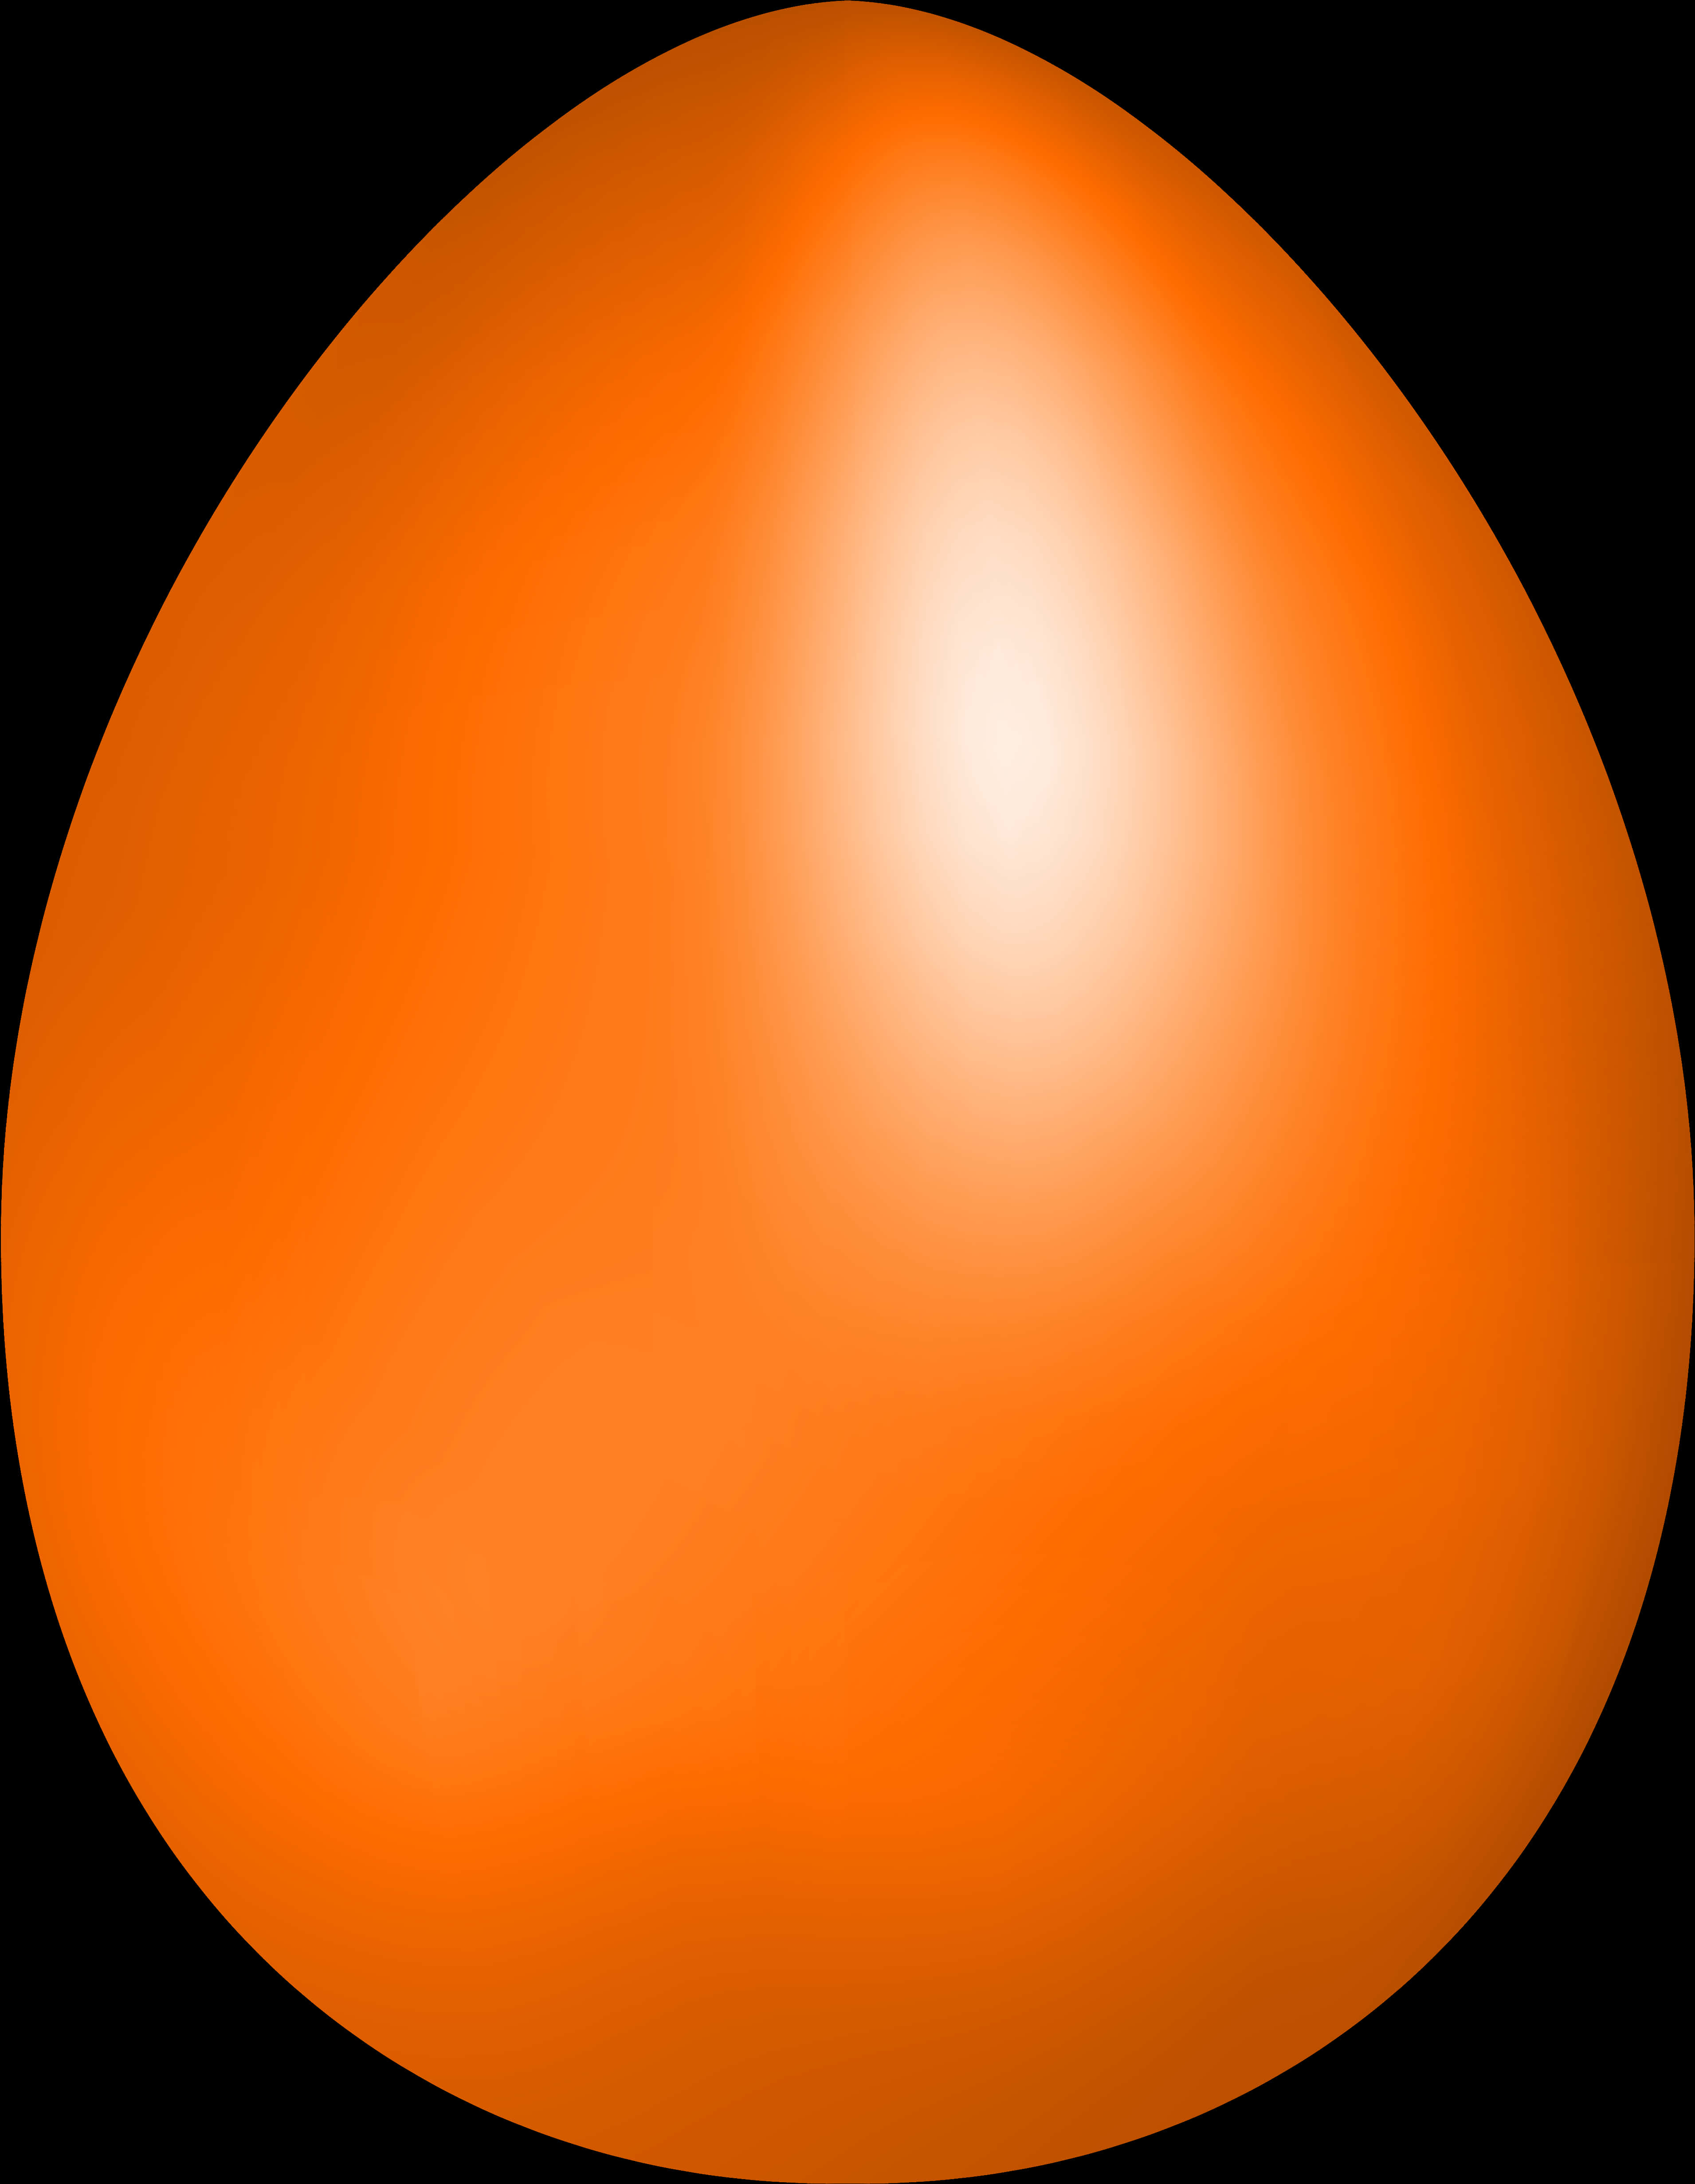 An Orange Egg With A Black Background